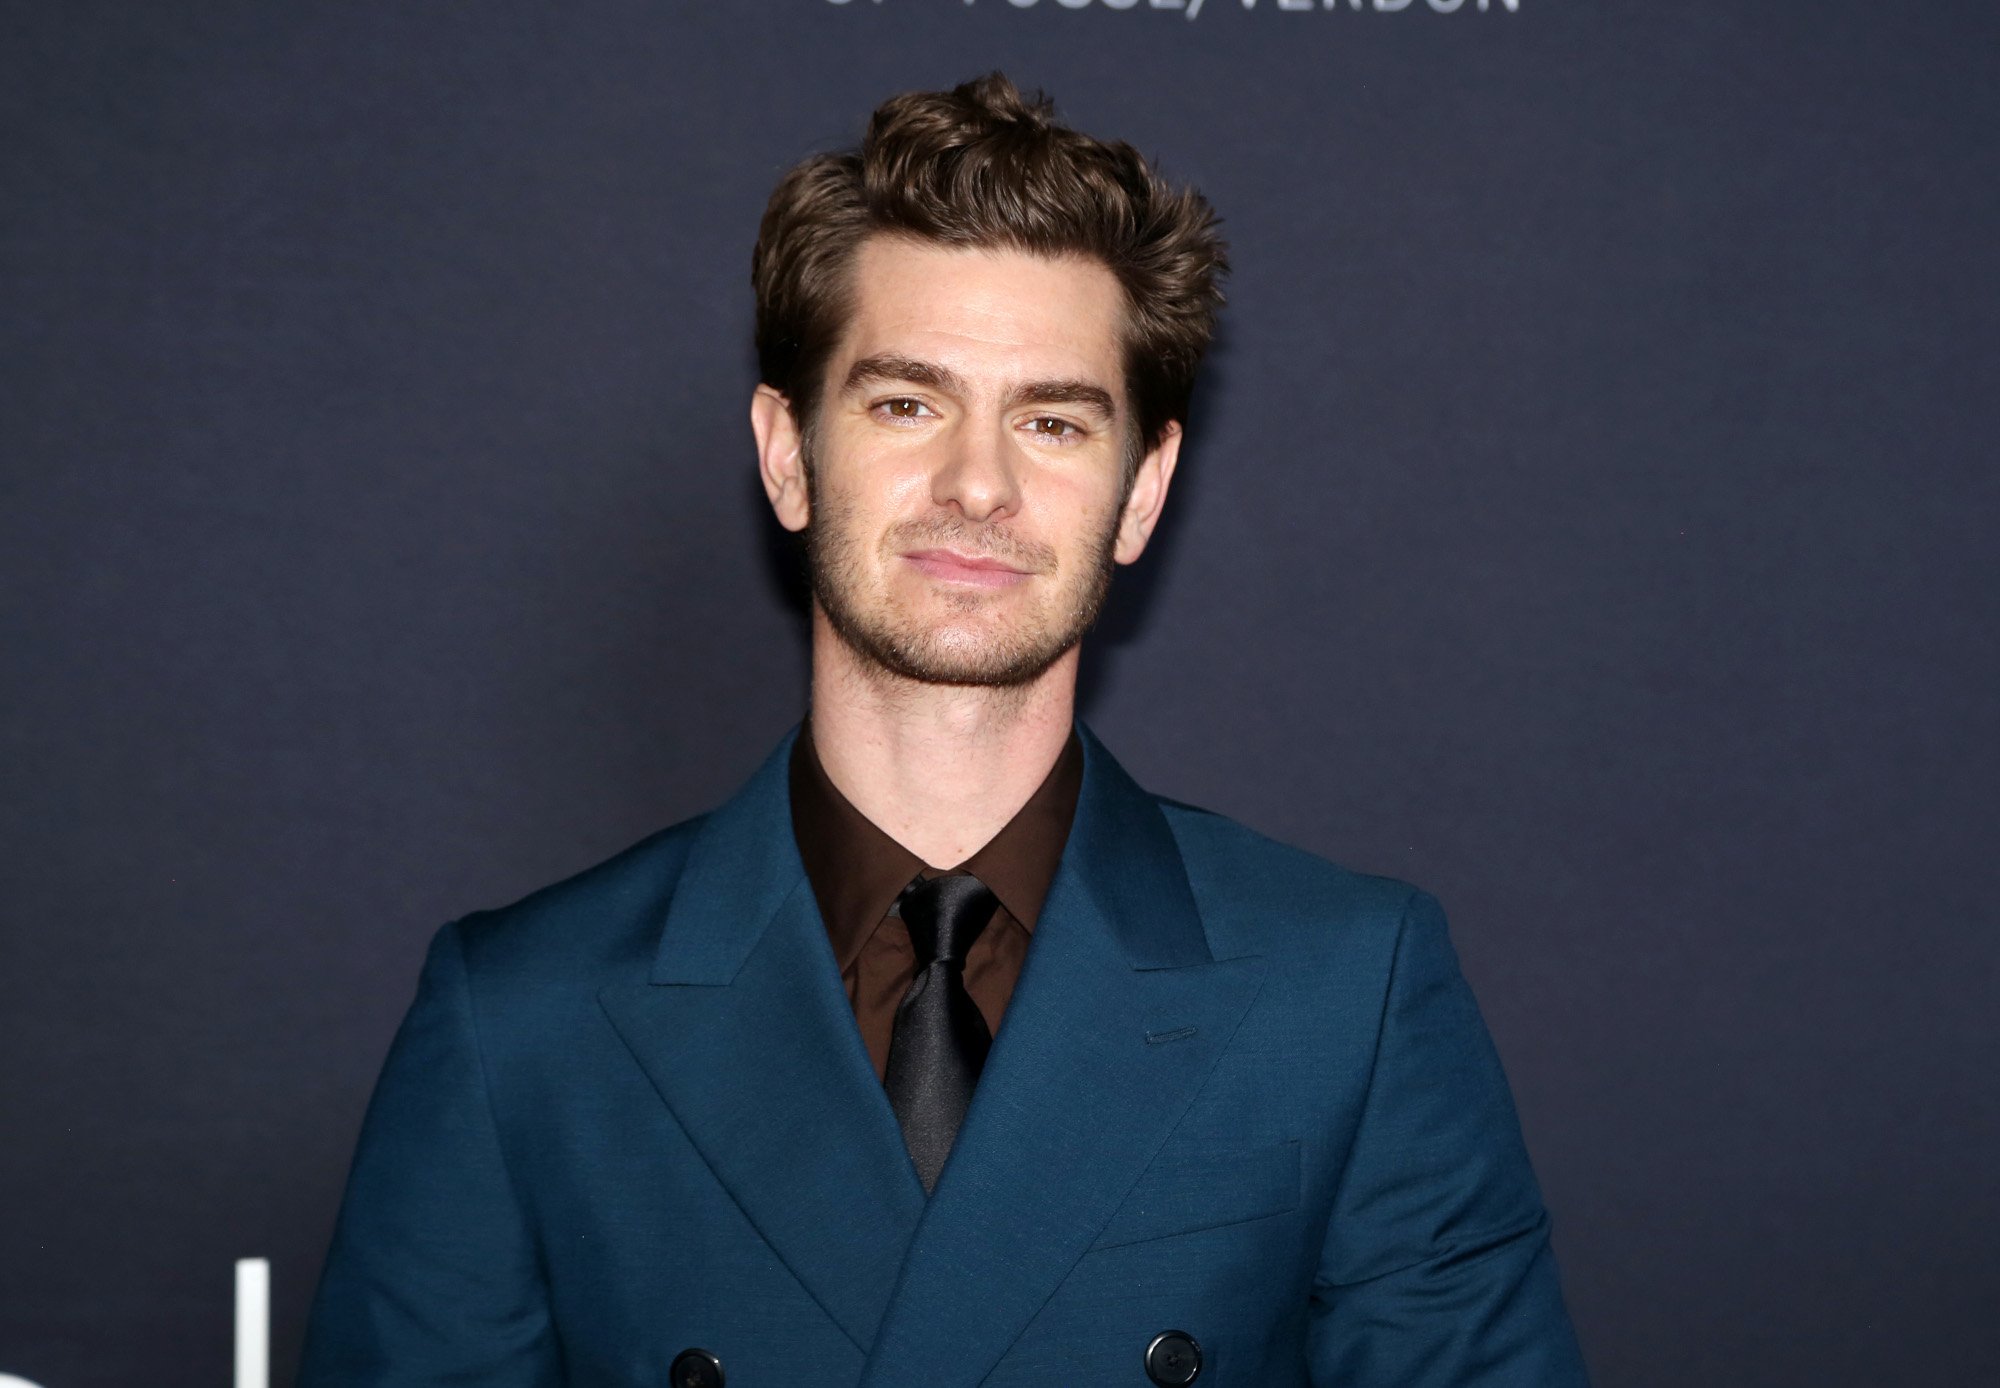 'Spider-Man: No Way Home' actor Andrew Garfield wearing a blue suit, brown shirt, and black tie.